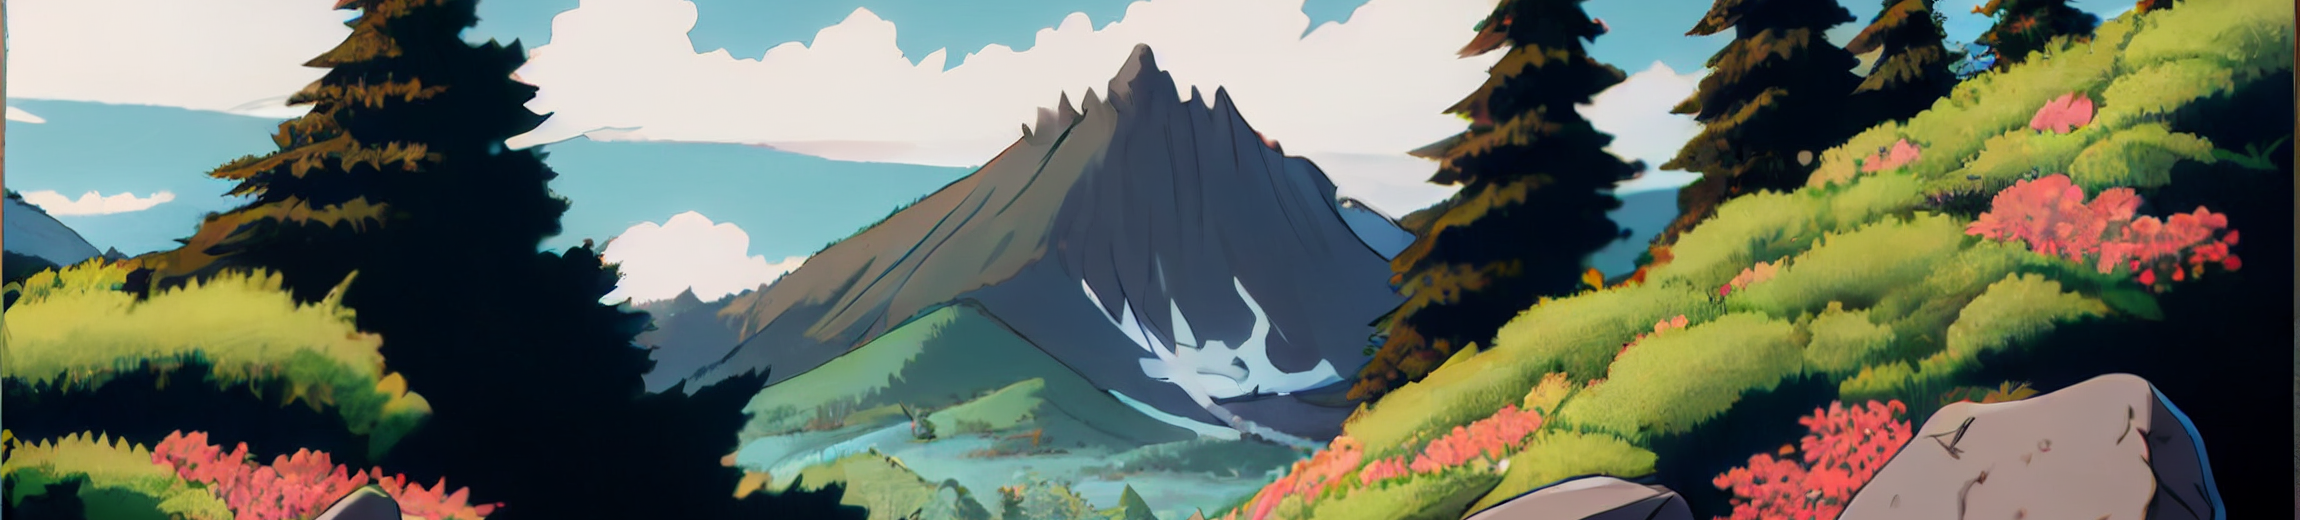 Backgrounds - Mountains and Snow